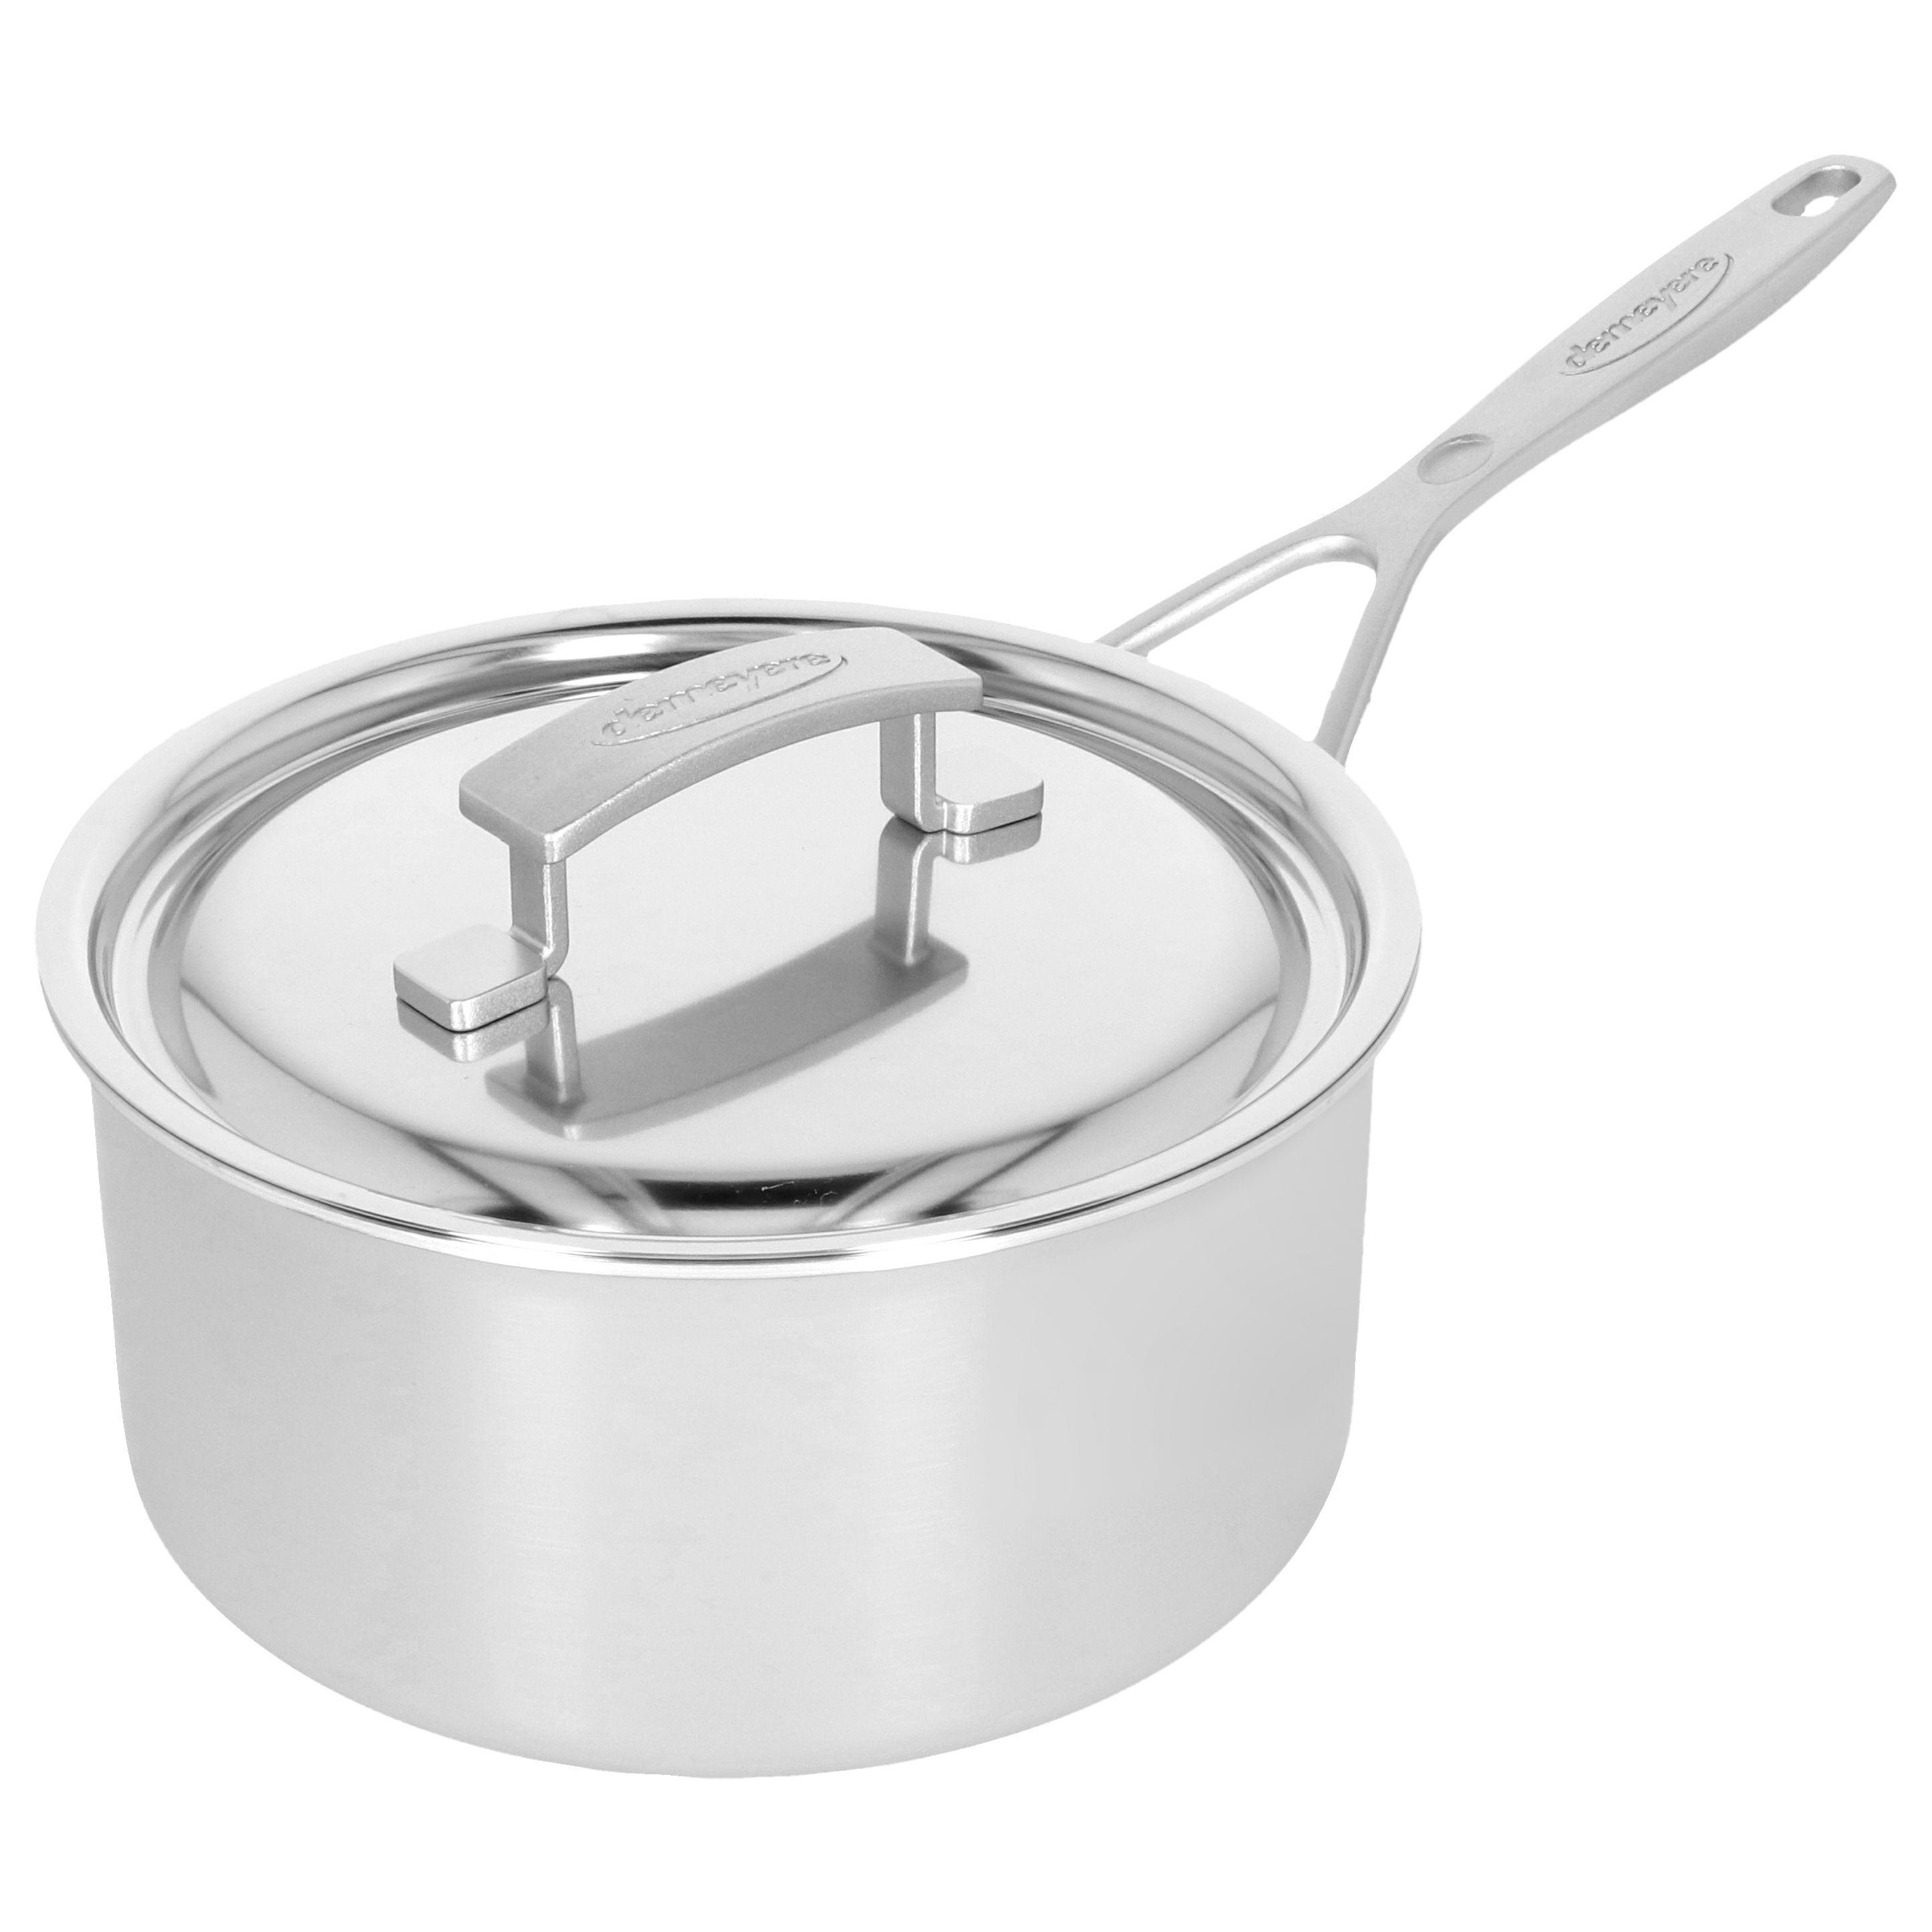 Demeyere Industry 5-Ply Sauté Pan, 3QT, Made in Belgium, Stainless